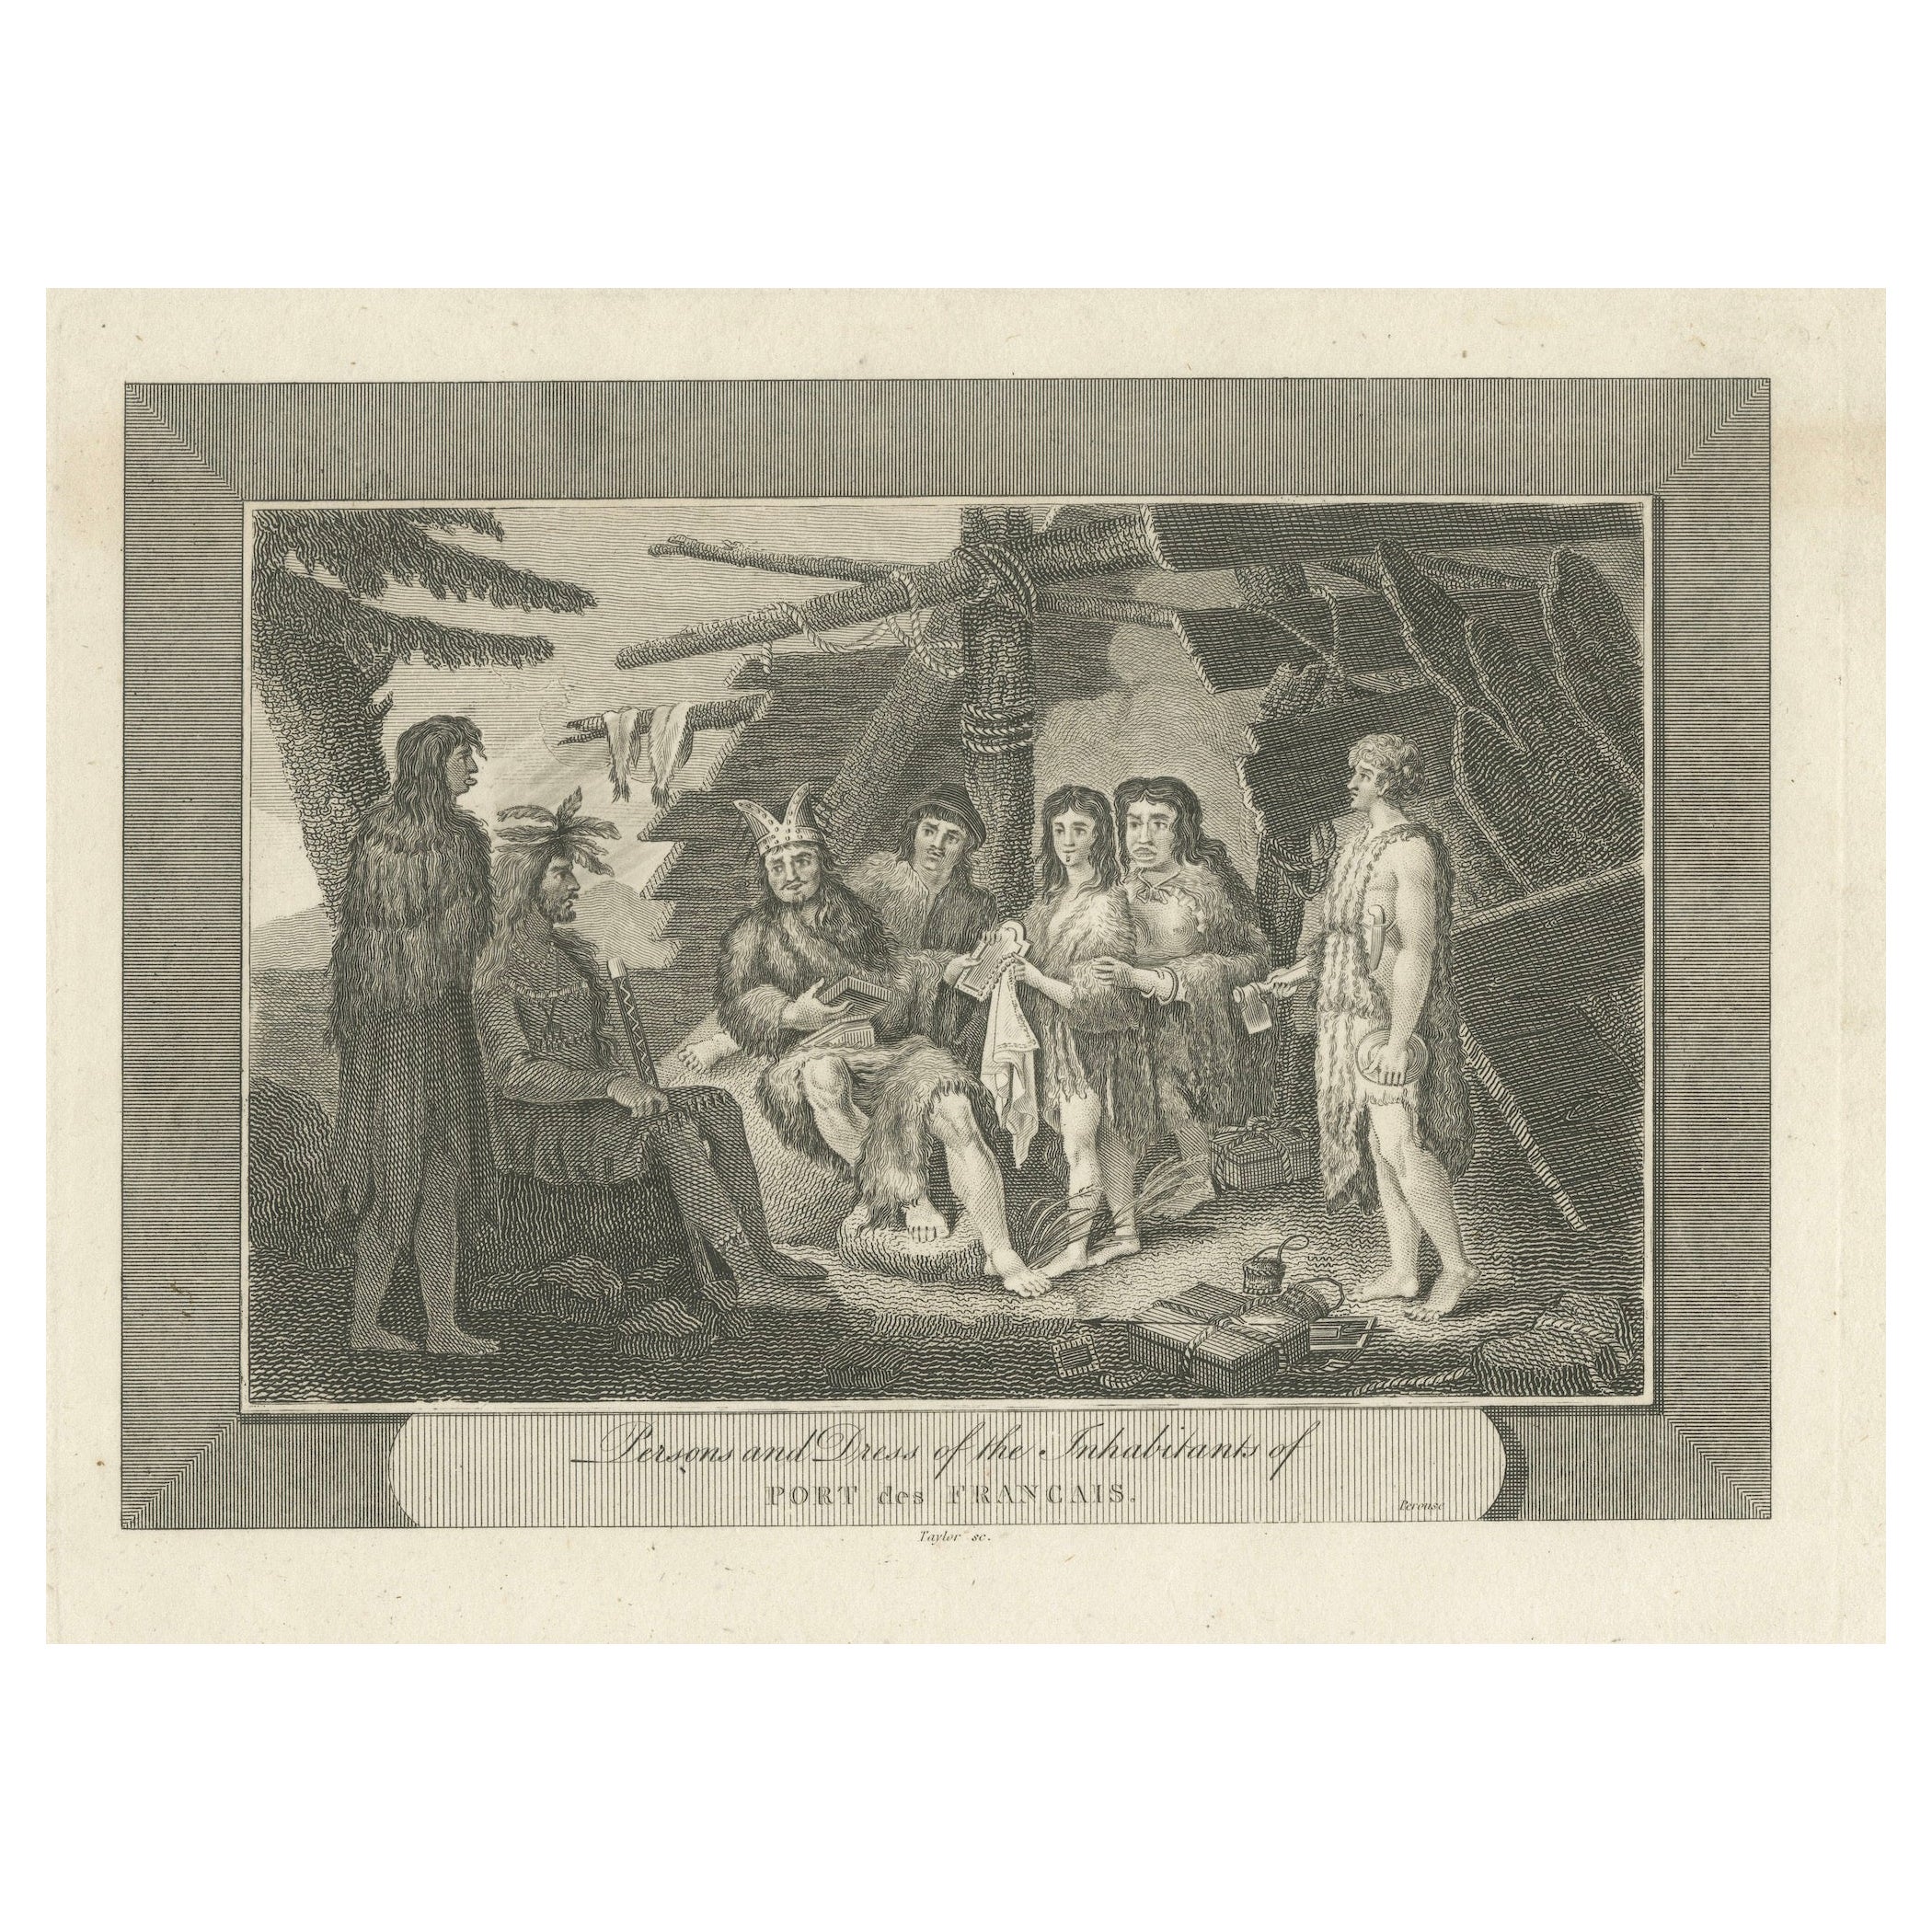 Encounter at Lituya Bay: French Explorers Among the Tlingit, 1786 For Sale